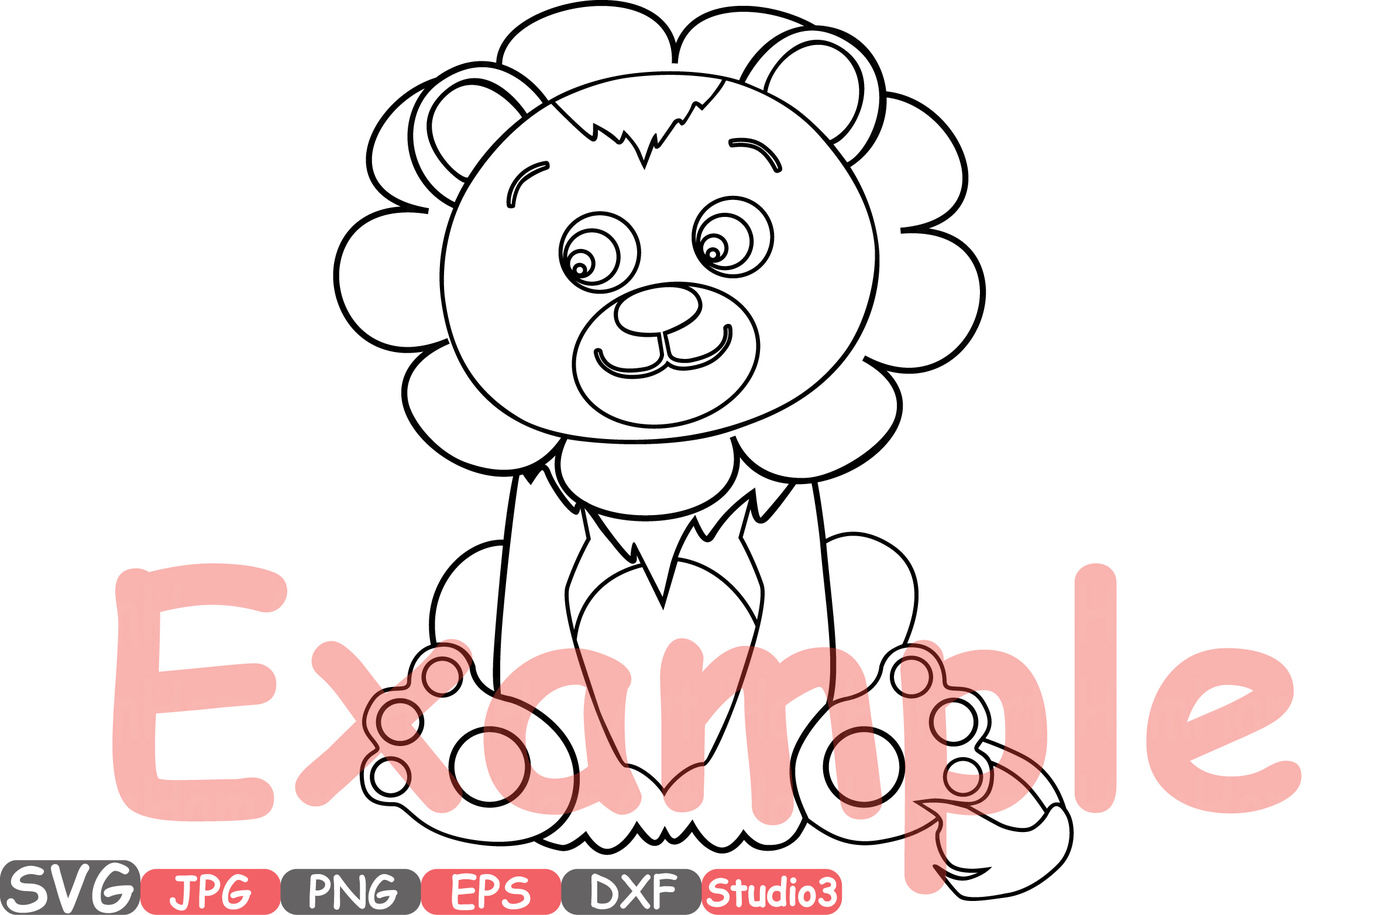 Download Baby Lion Silhouette Svg - Free Craft SVG files for personal use. Download them for free and ...